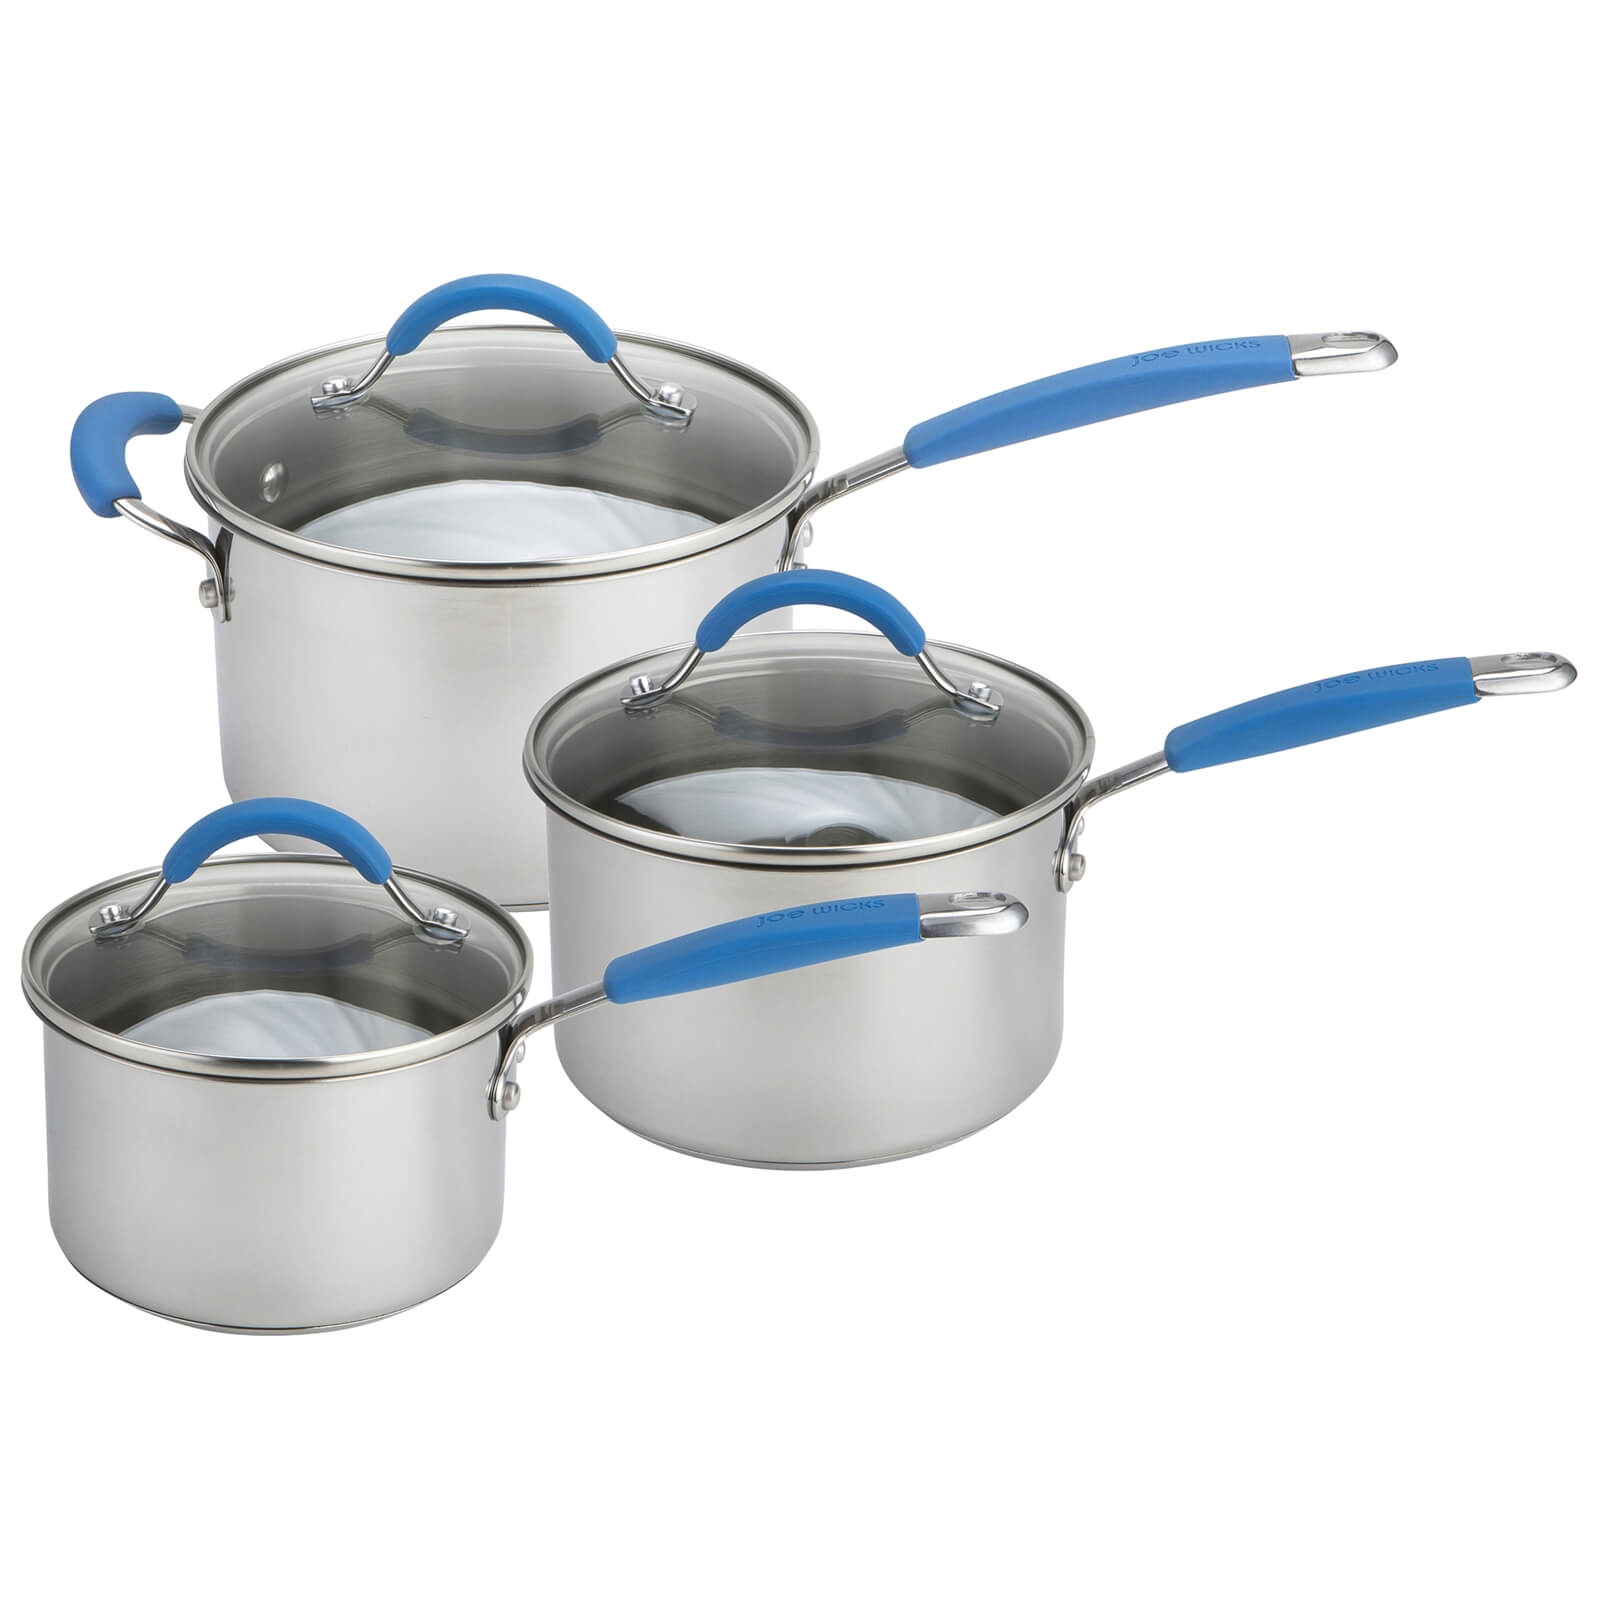 Joe Wicks Quick and Even Induction Non-Stick Stainless Steel Saucepans - Set of 3